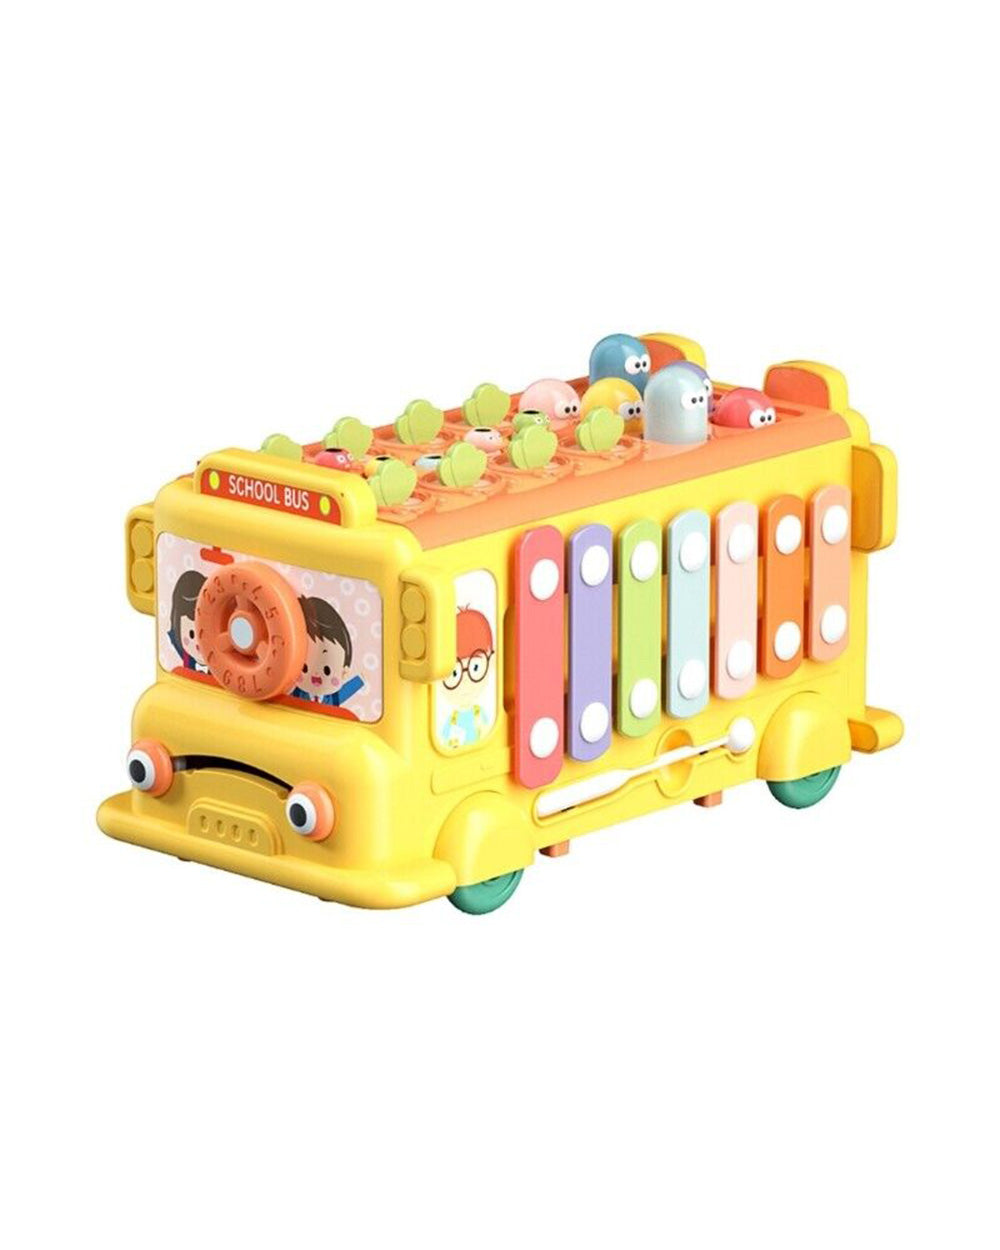 Multifunctional Activity School Bus Eductional Toy 18 mth